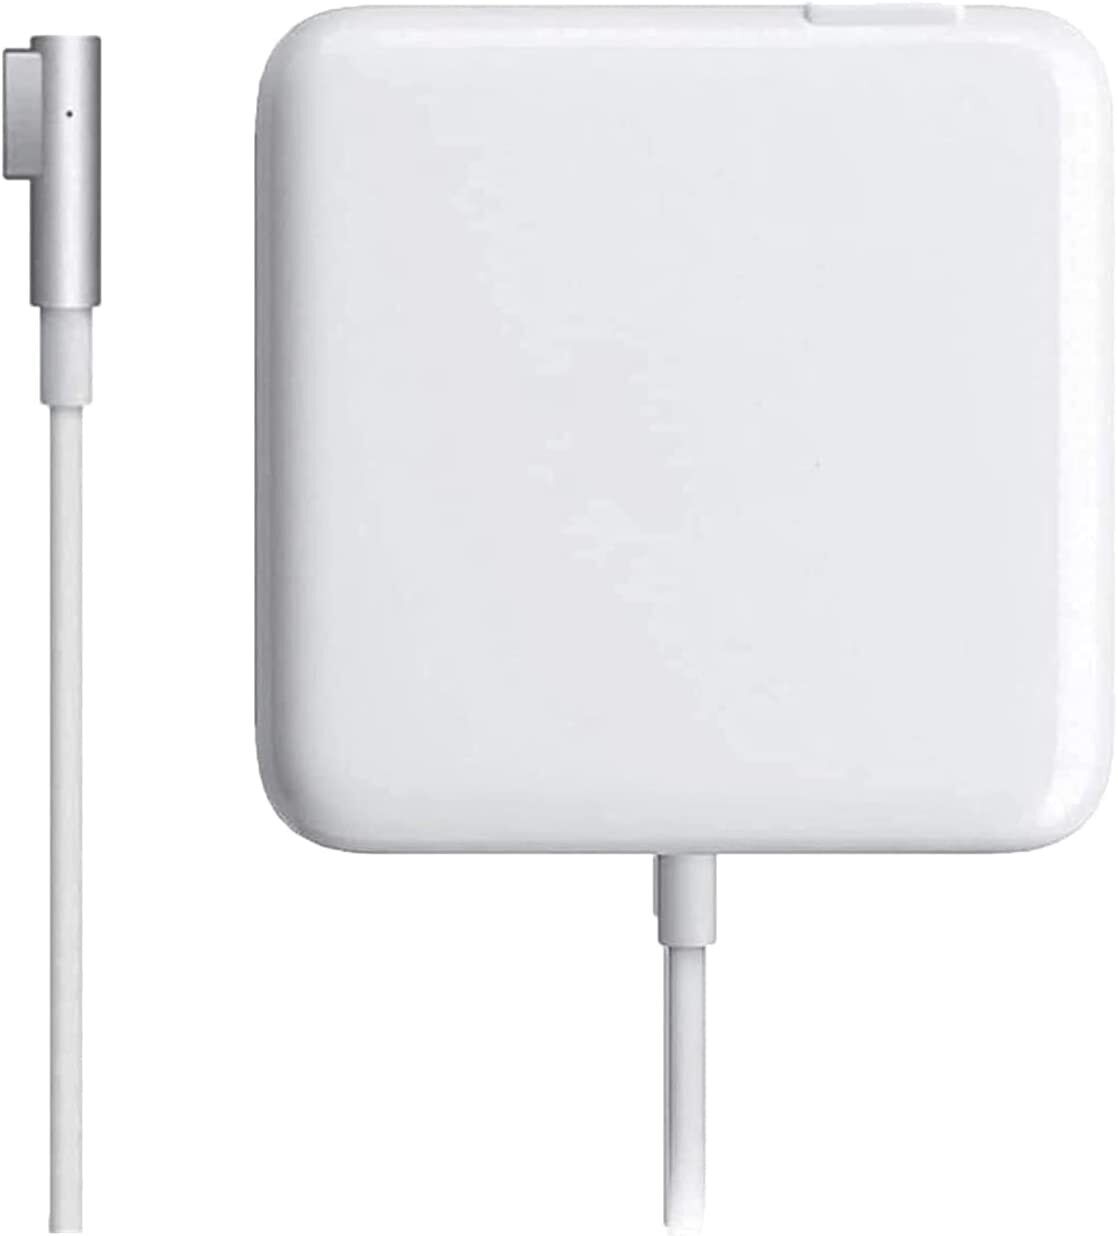 GENUINE Apple MC747LL/A 45W Magsafe 1 Power Adapter Charger BRAND NEW SEALED